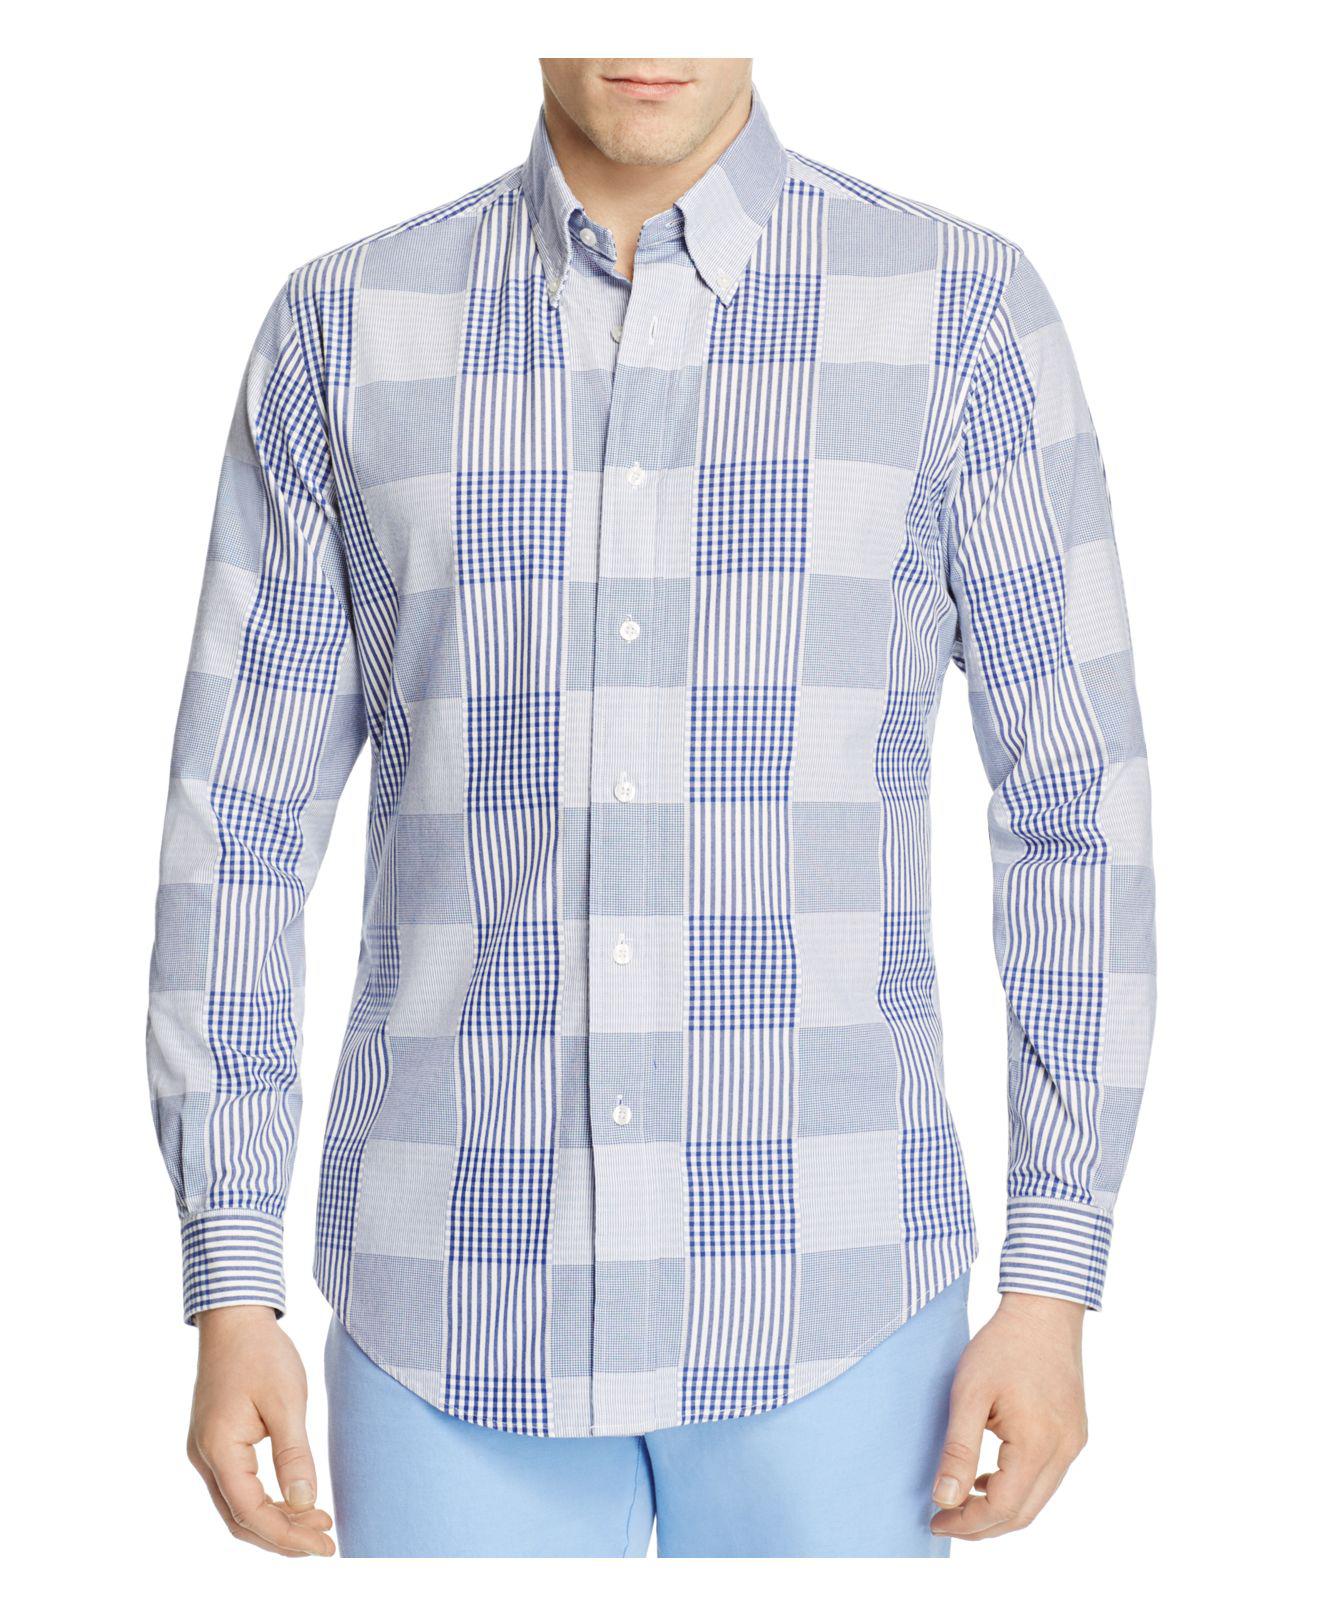 Lyst - Brooks Brothers Regent Patchwork Slim Fit Button-down Shirt in ...